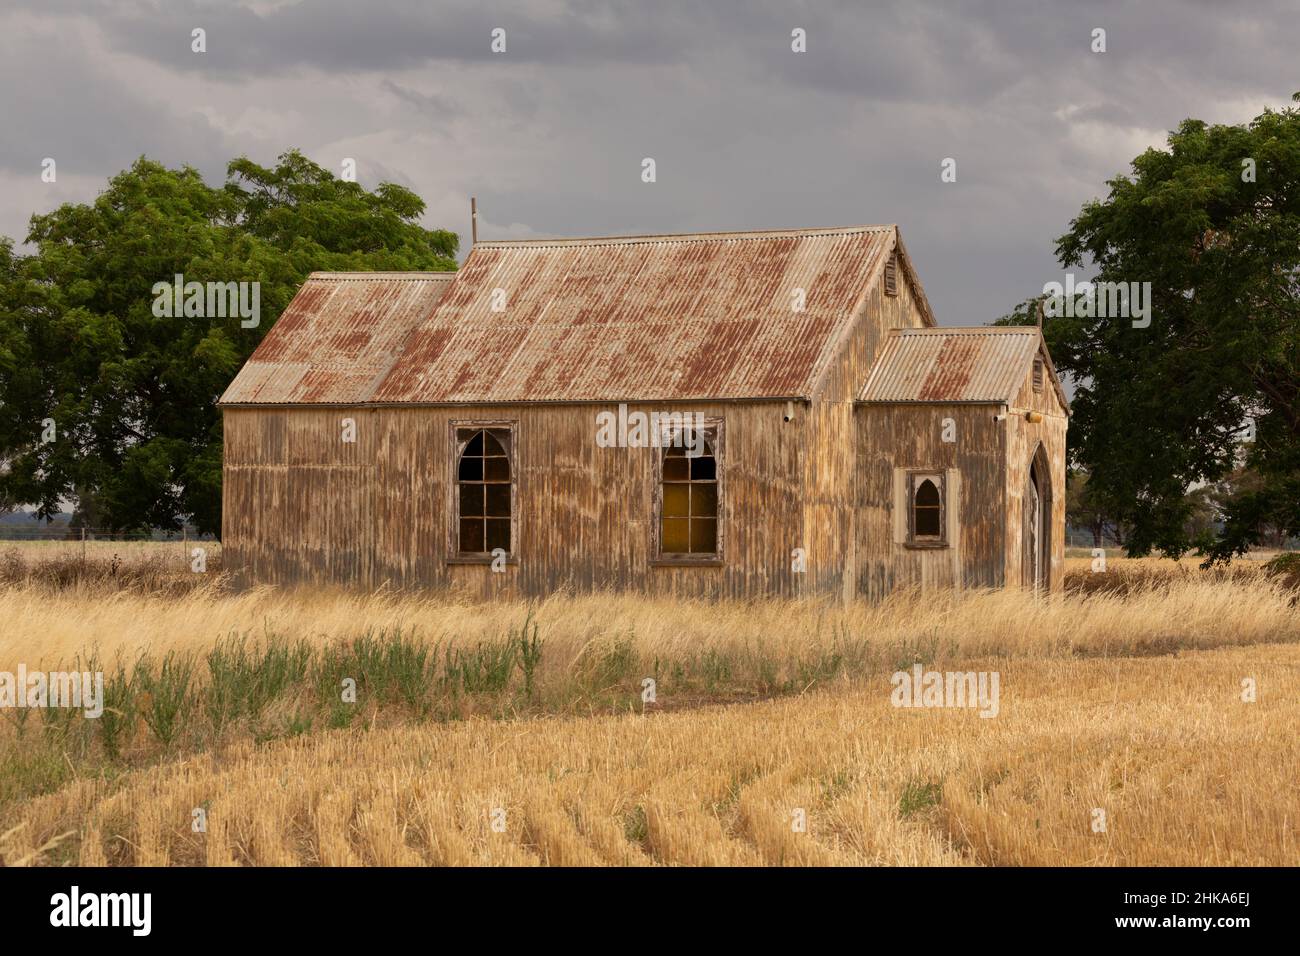 Rustic old abandoned church in rural NSW Australia Stock Photo